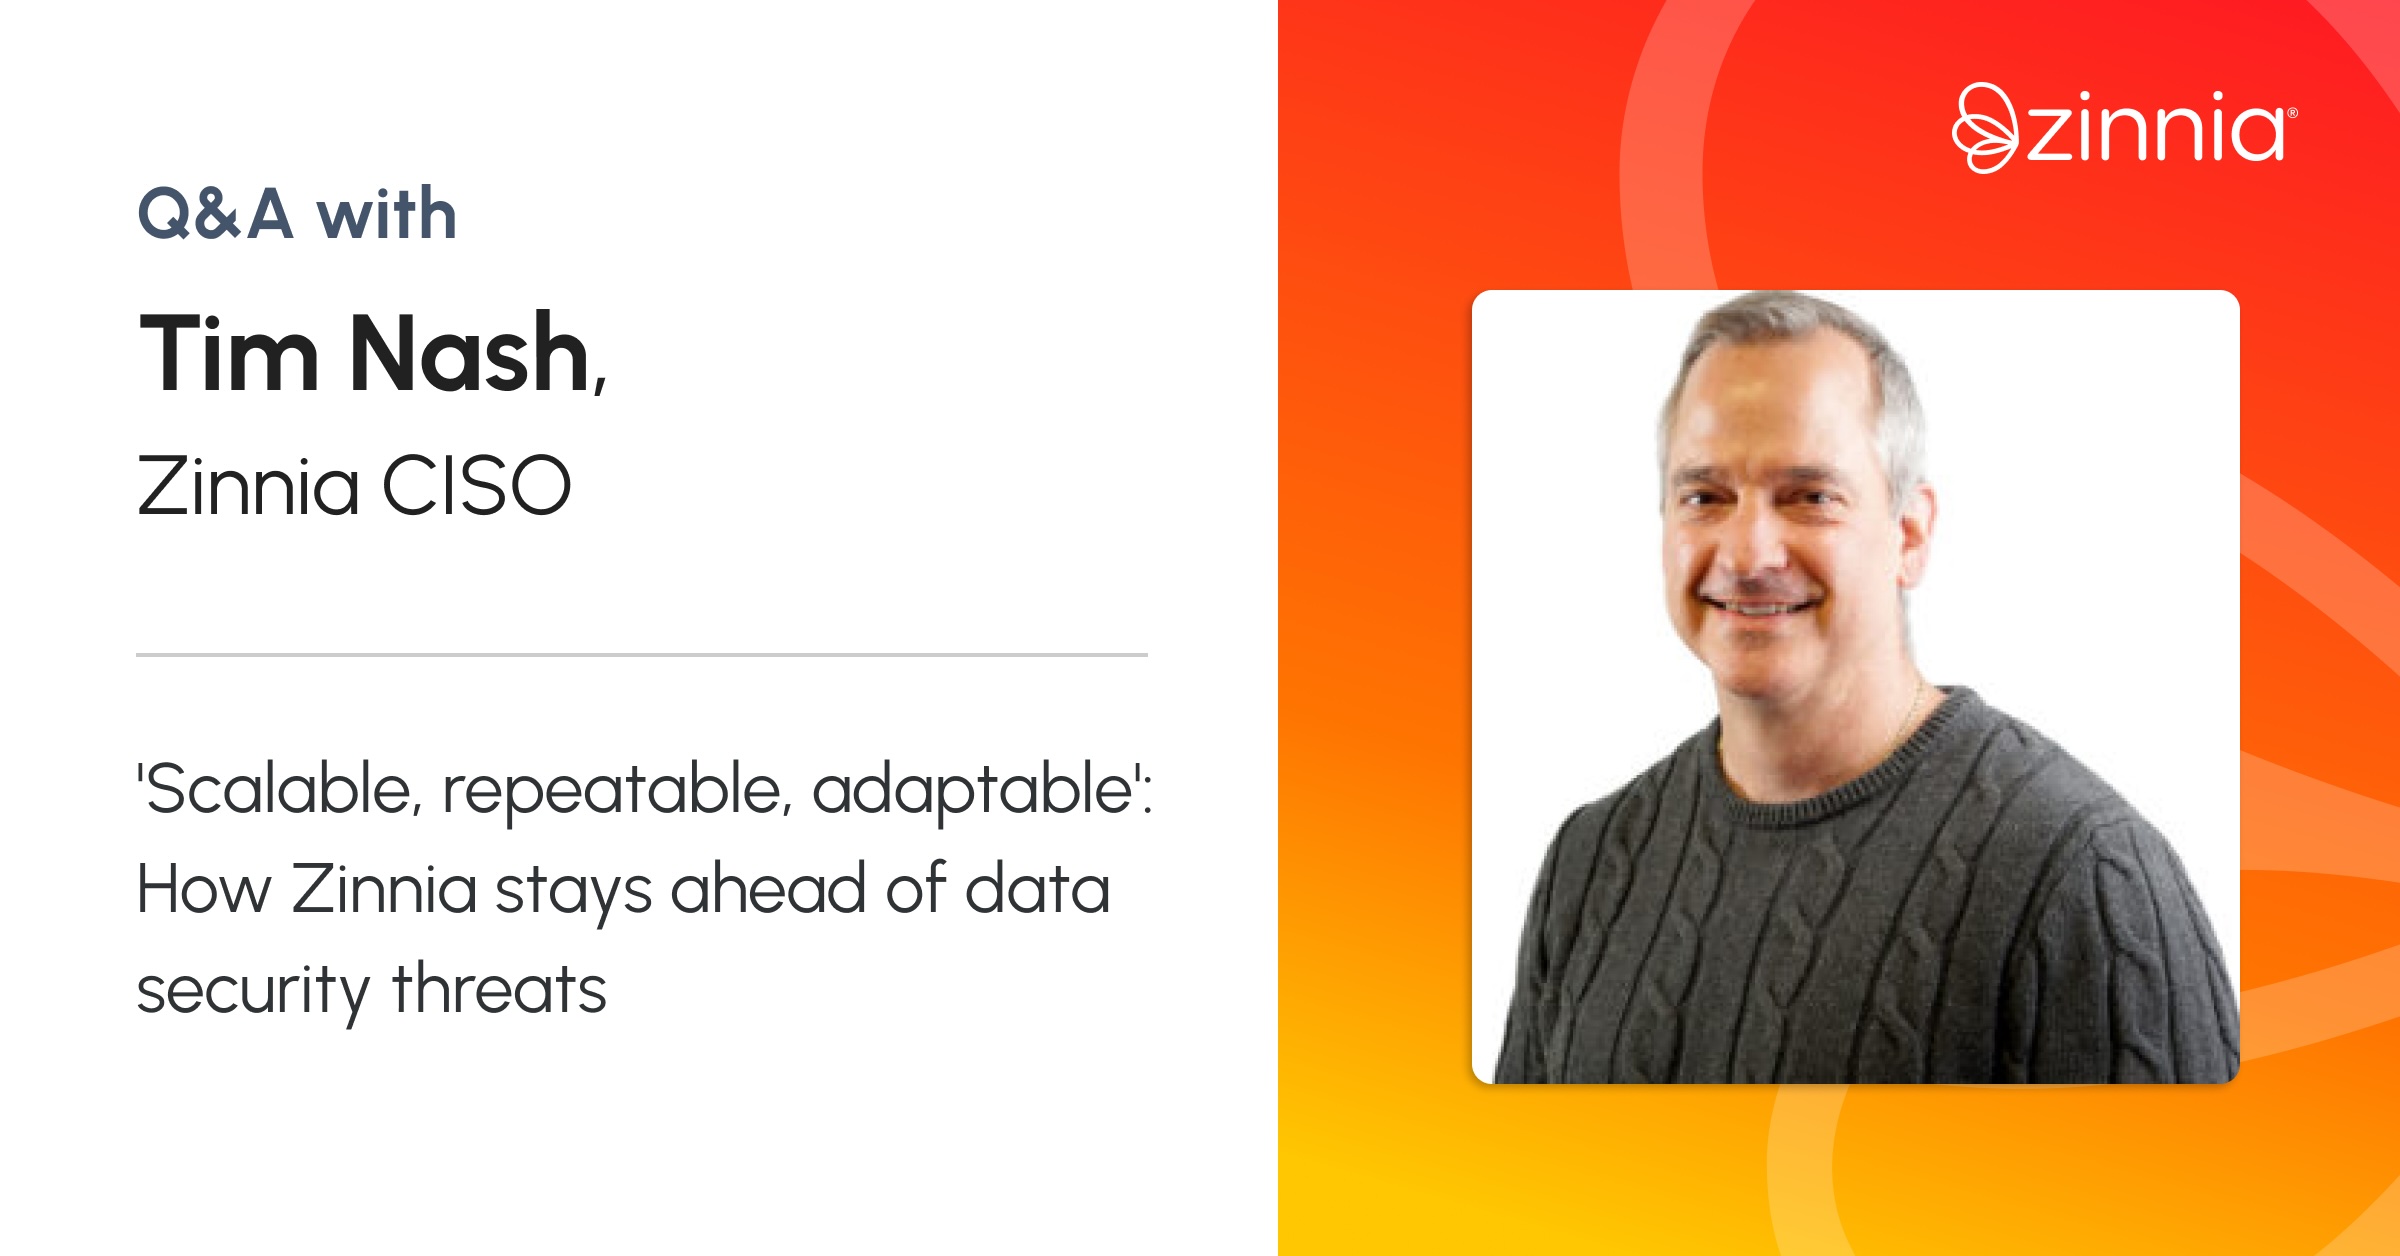 Image of Tim Nash, Zinnia CISO, alongside a Q&A heading with the quote: 'Scalable, repeatable, adaptable': How Zinnia stays ahead of data security threats.